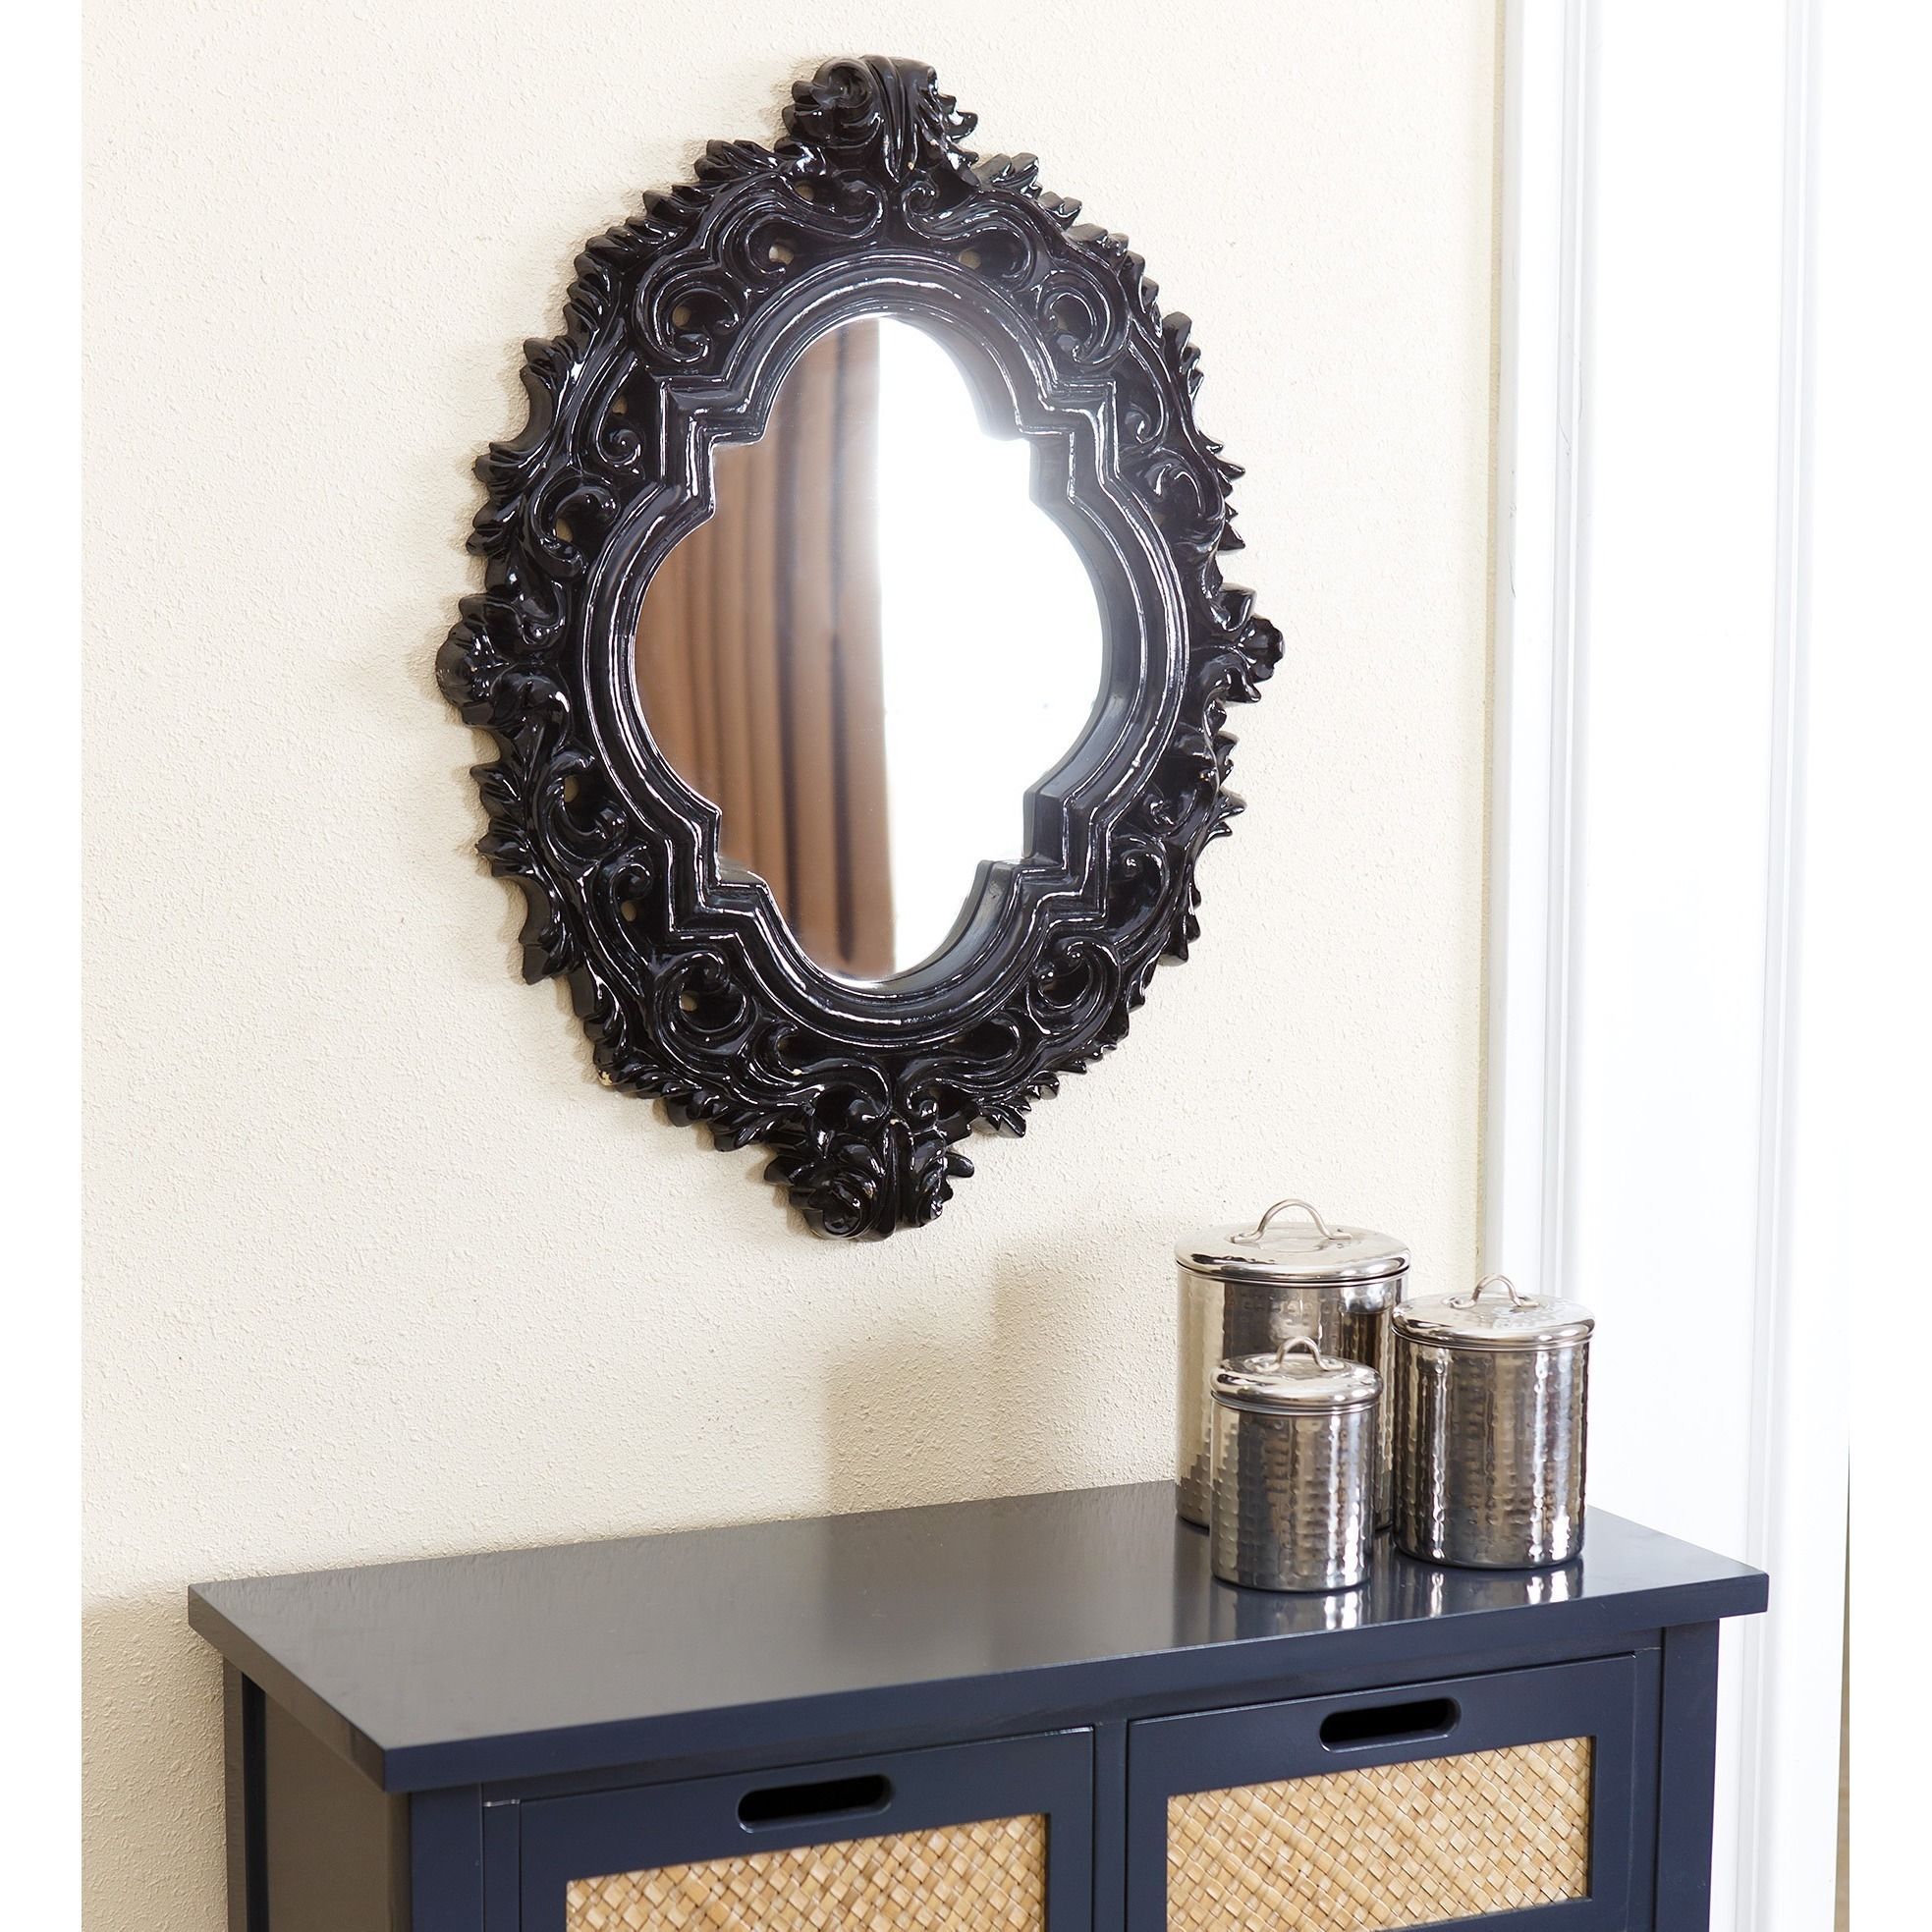 An Ornate And Thick Black Frame Adds Drama And Style To This Pertaining To Gingerich Resin Modern &amp; Contemporary Accent Mirrors (View 12 of 20)